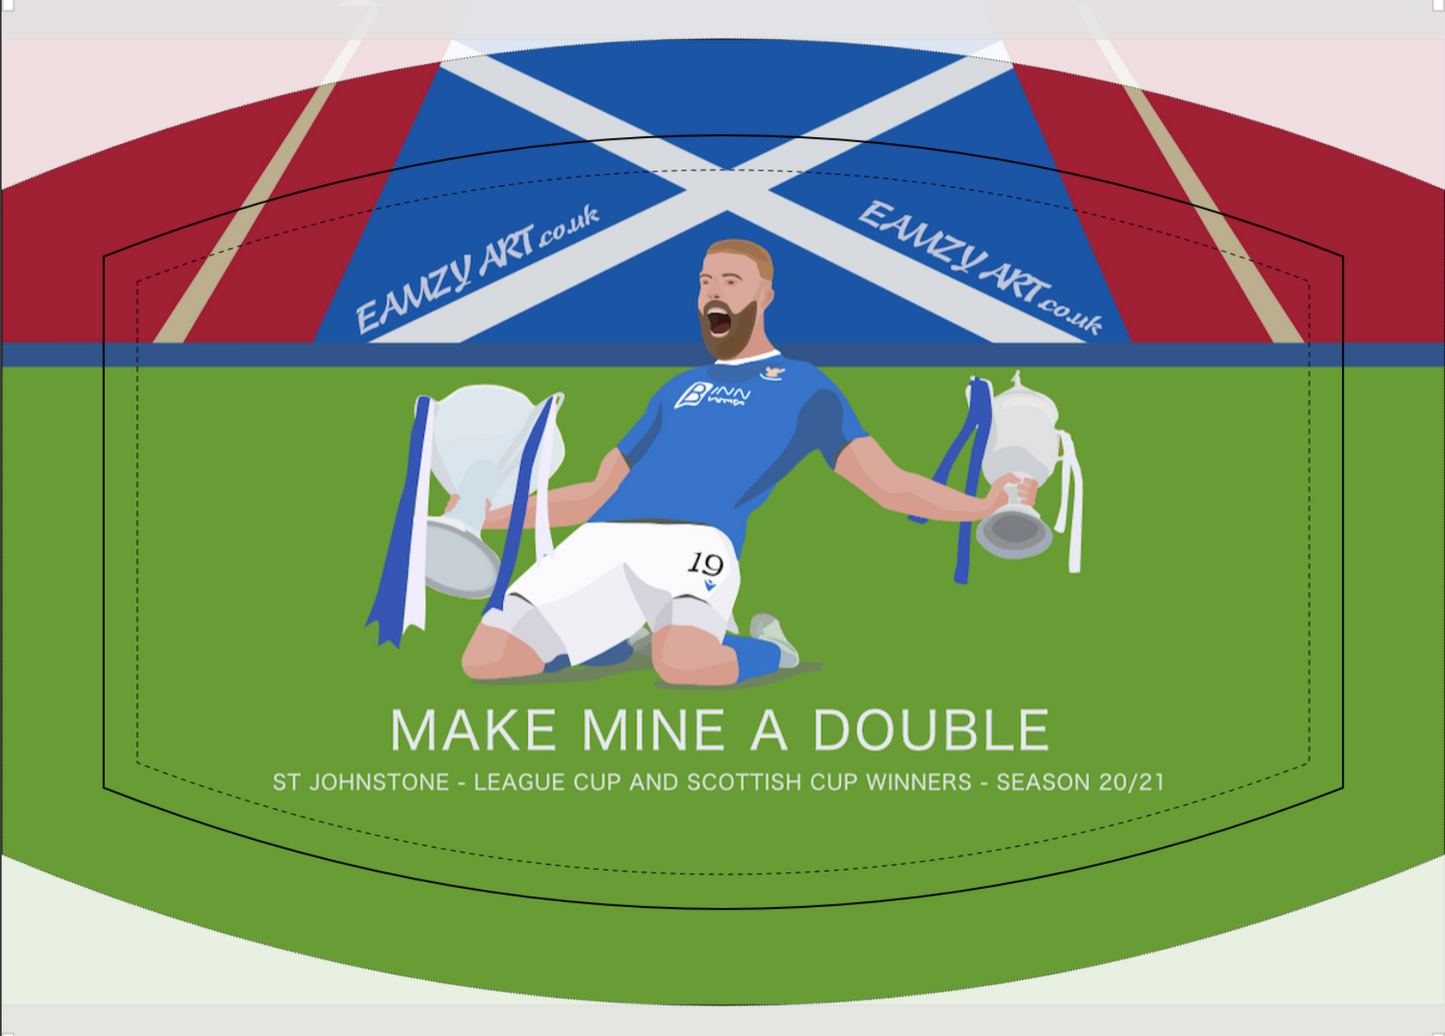 St Johnstone FC double cup winners 2021 - "Make Mine a Double" face mask celebrating the Club's magnificent double cup winning achievements in 2021